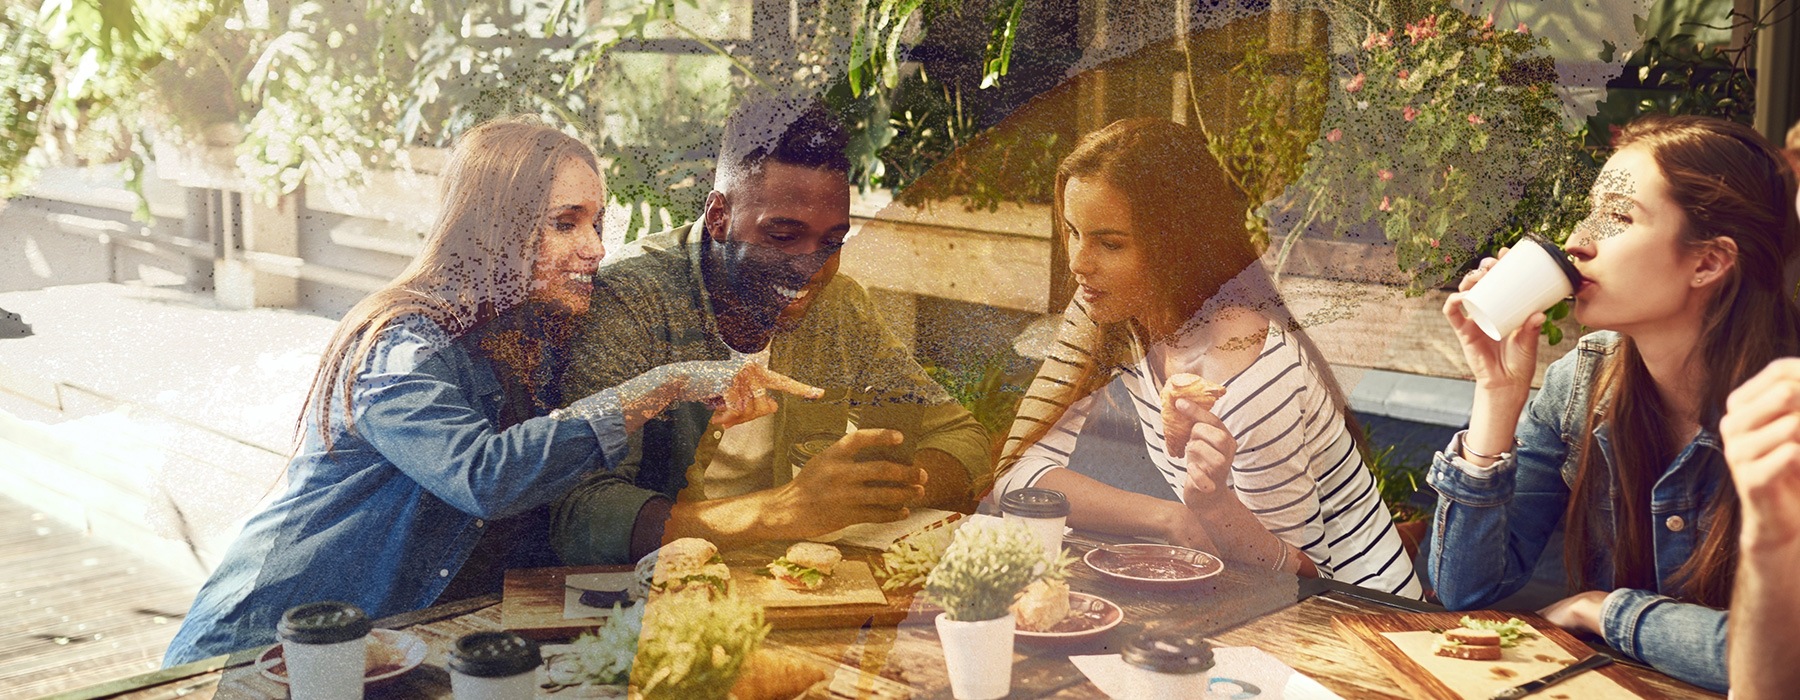 lifestyle image of friends eating outdoors